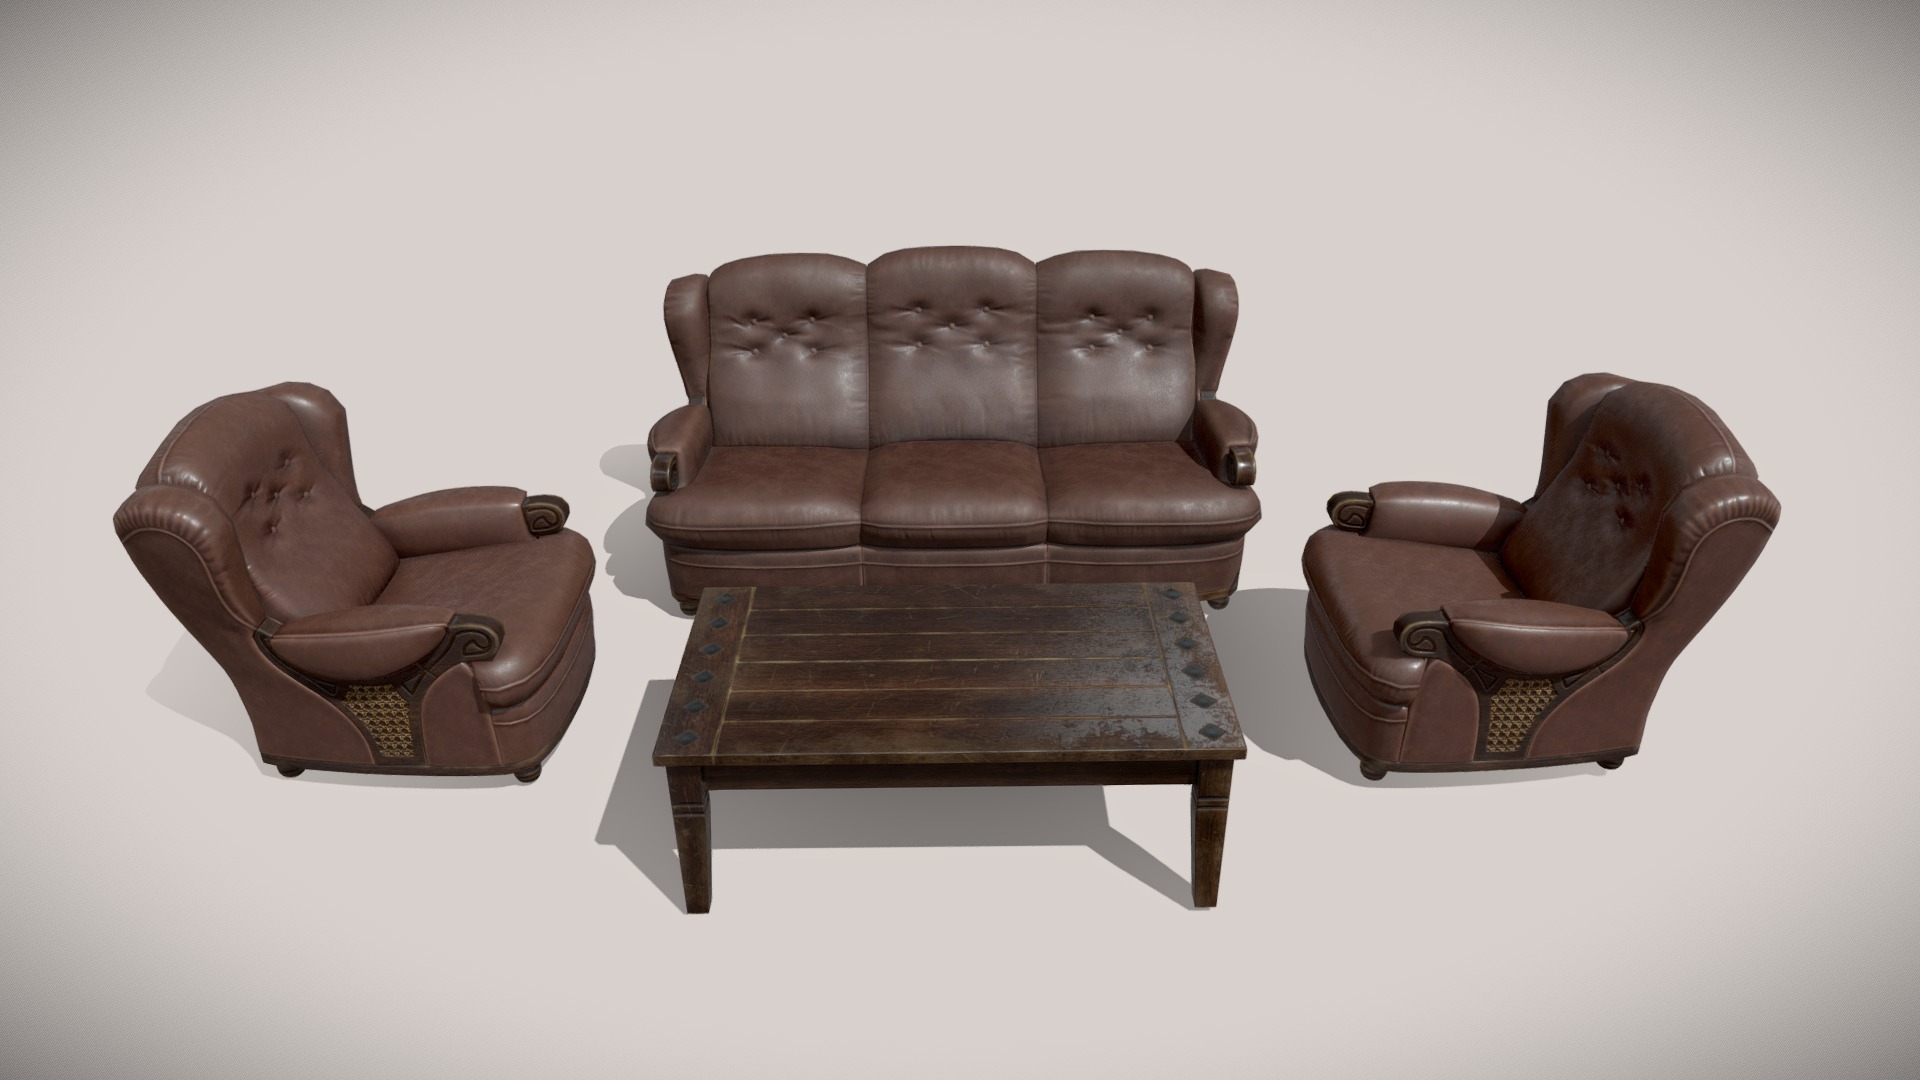 3D model Classic furniture set. - This is a 3D model of the Classic furniture set.. The 3D model is about a group of brown leather chairs.